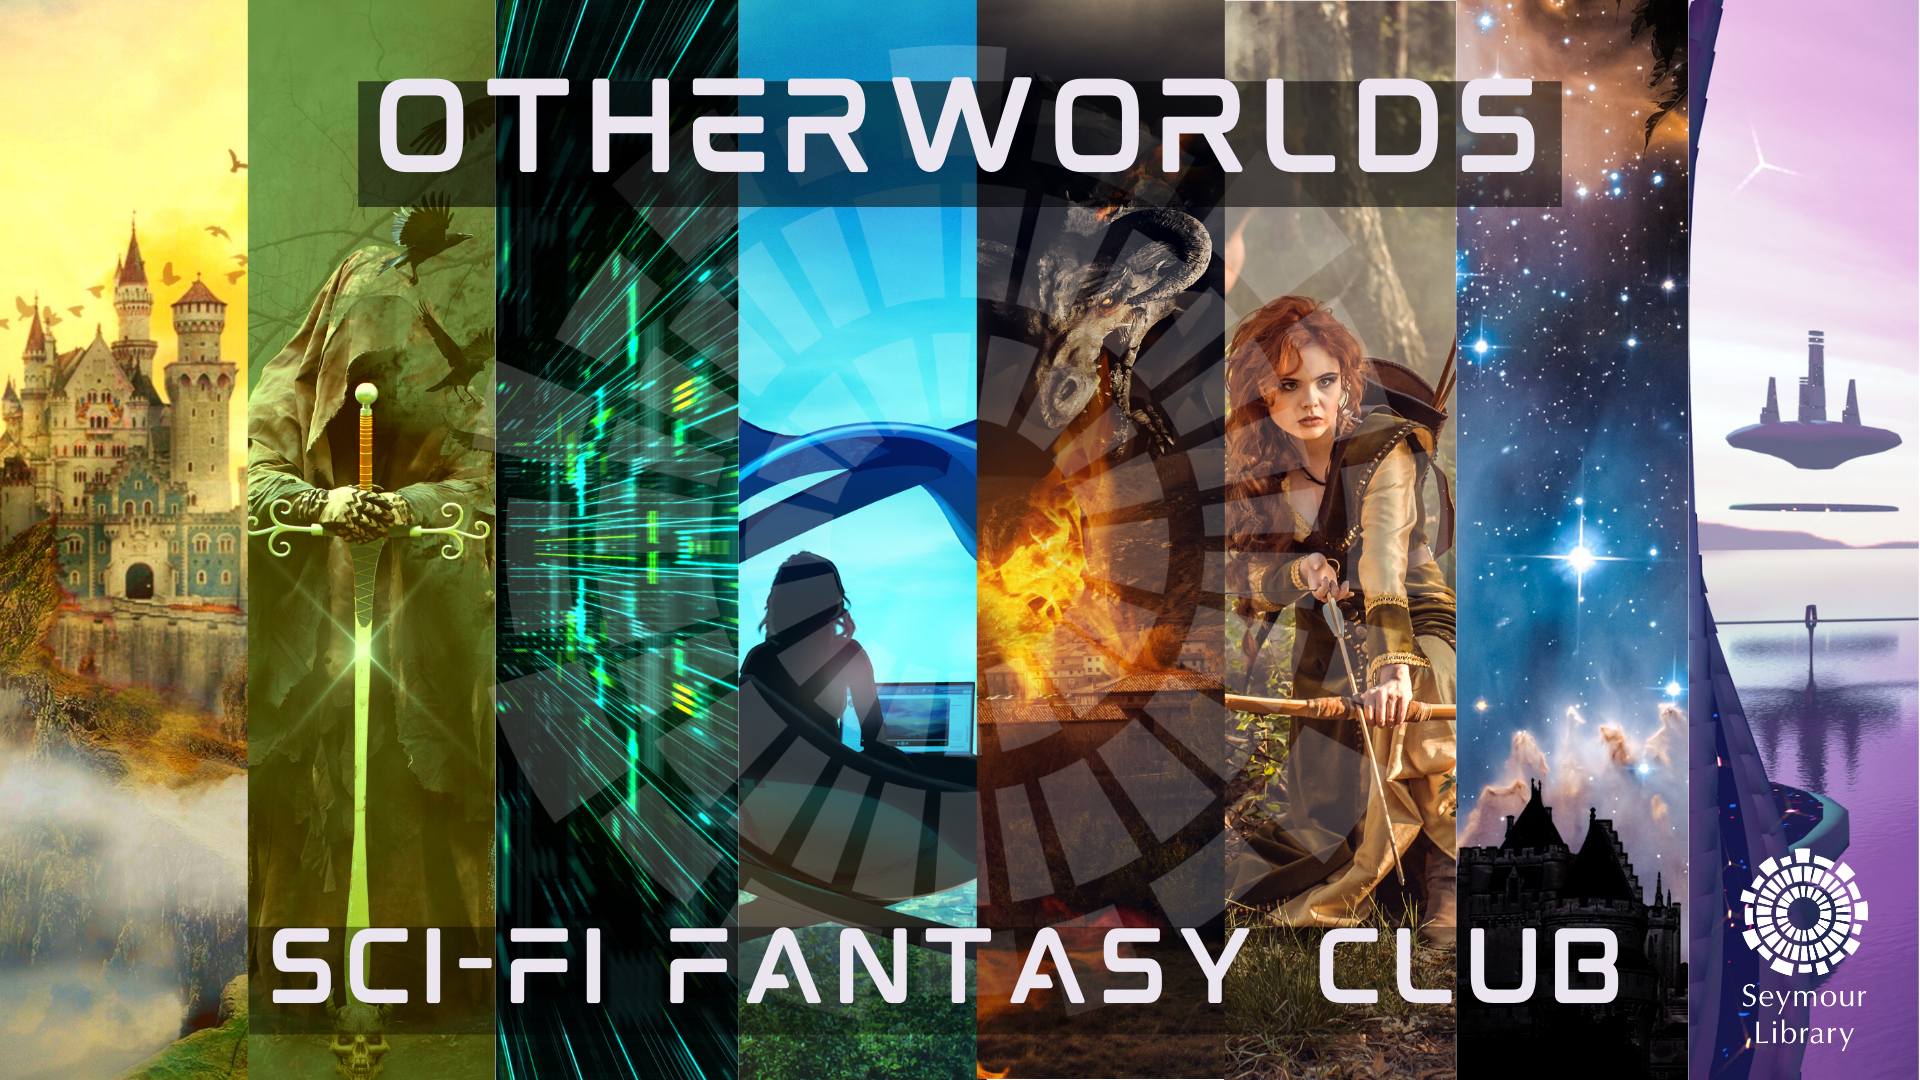 Otherworlds Sci-Fi Fantasy Club - graphic with several different scenes from slaying the dragon to futuristic landscapes